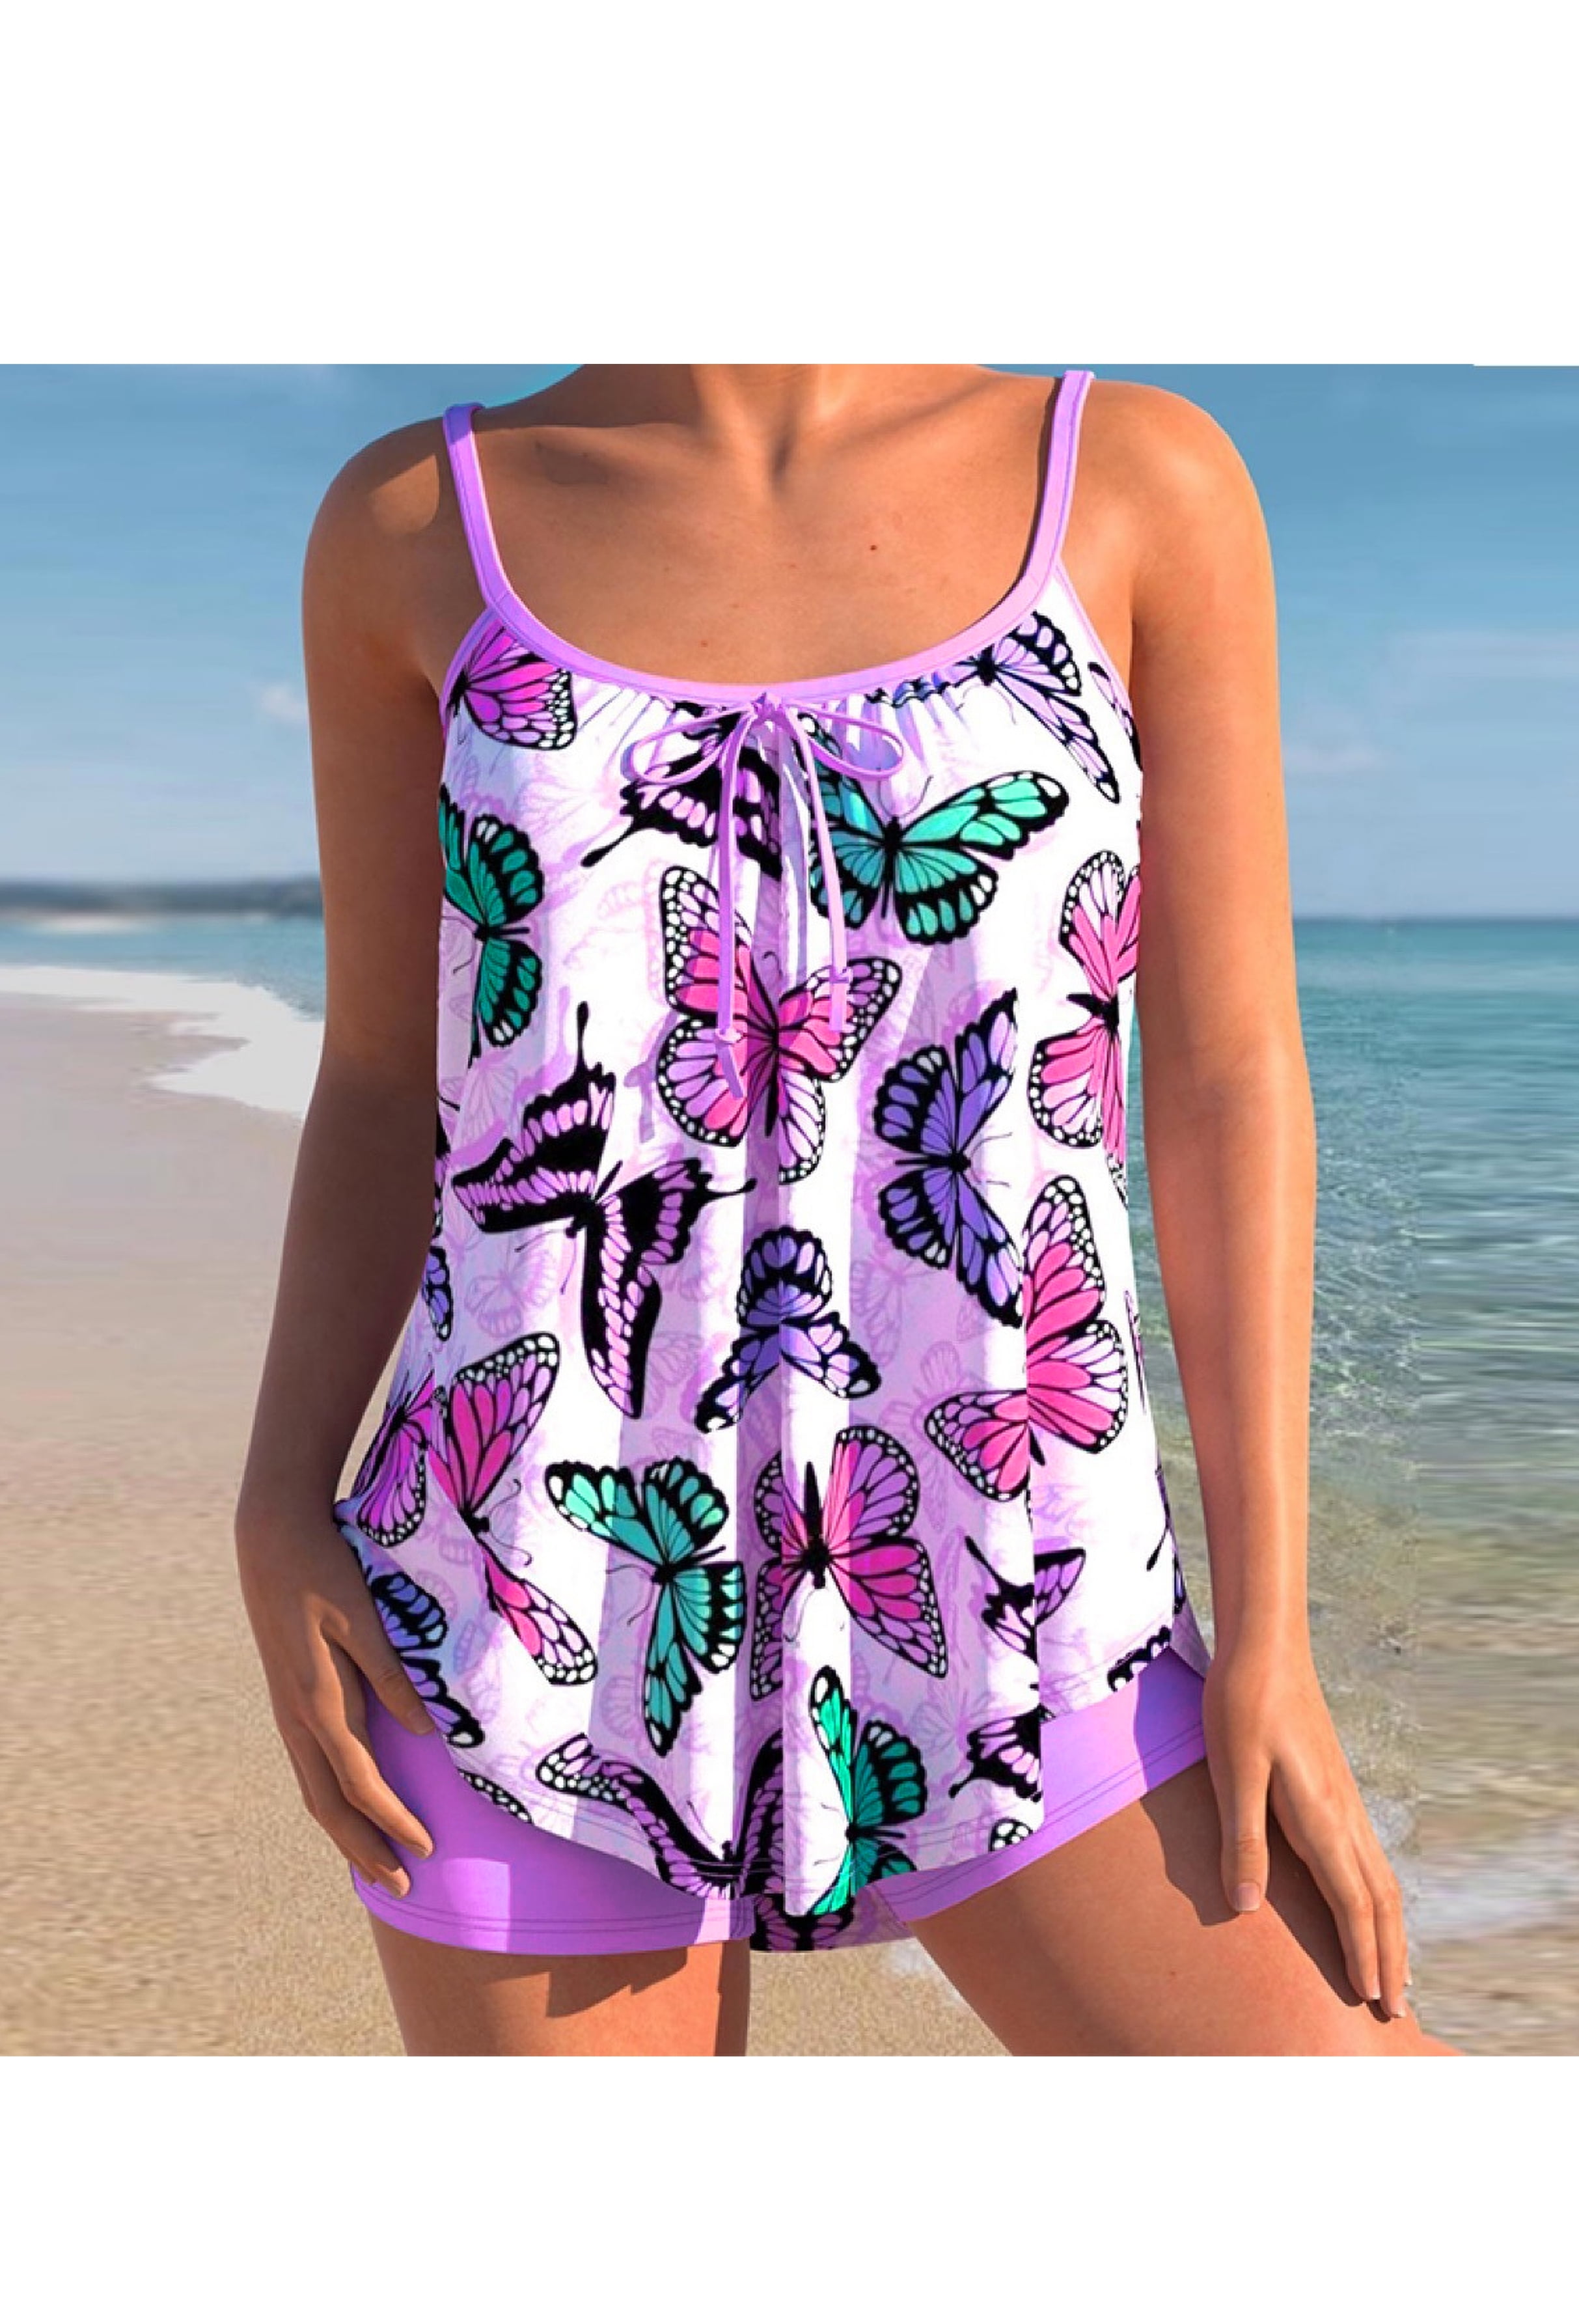 Darzheoy Swimsuits For Women,Women With Chest Pad Without